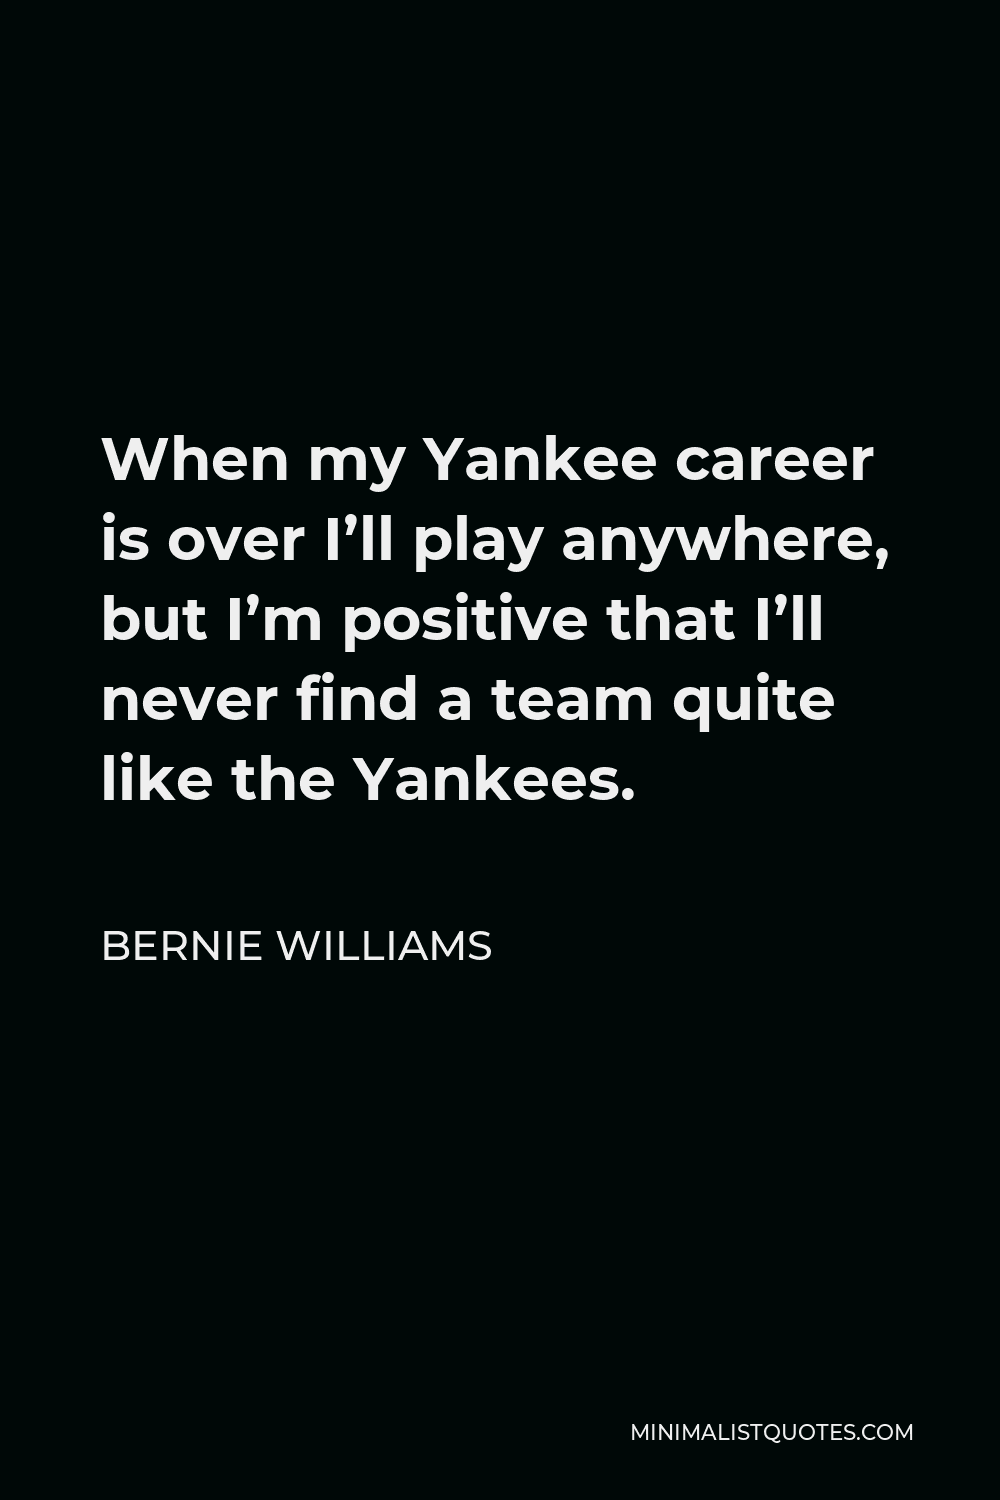 Bernie Williams Quote - When my Yankee career is over I’ll play anywhere, but I’m positive that I’ll never find a team quite like the Yankees.